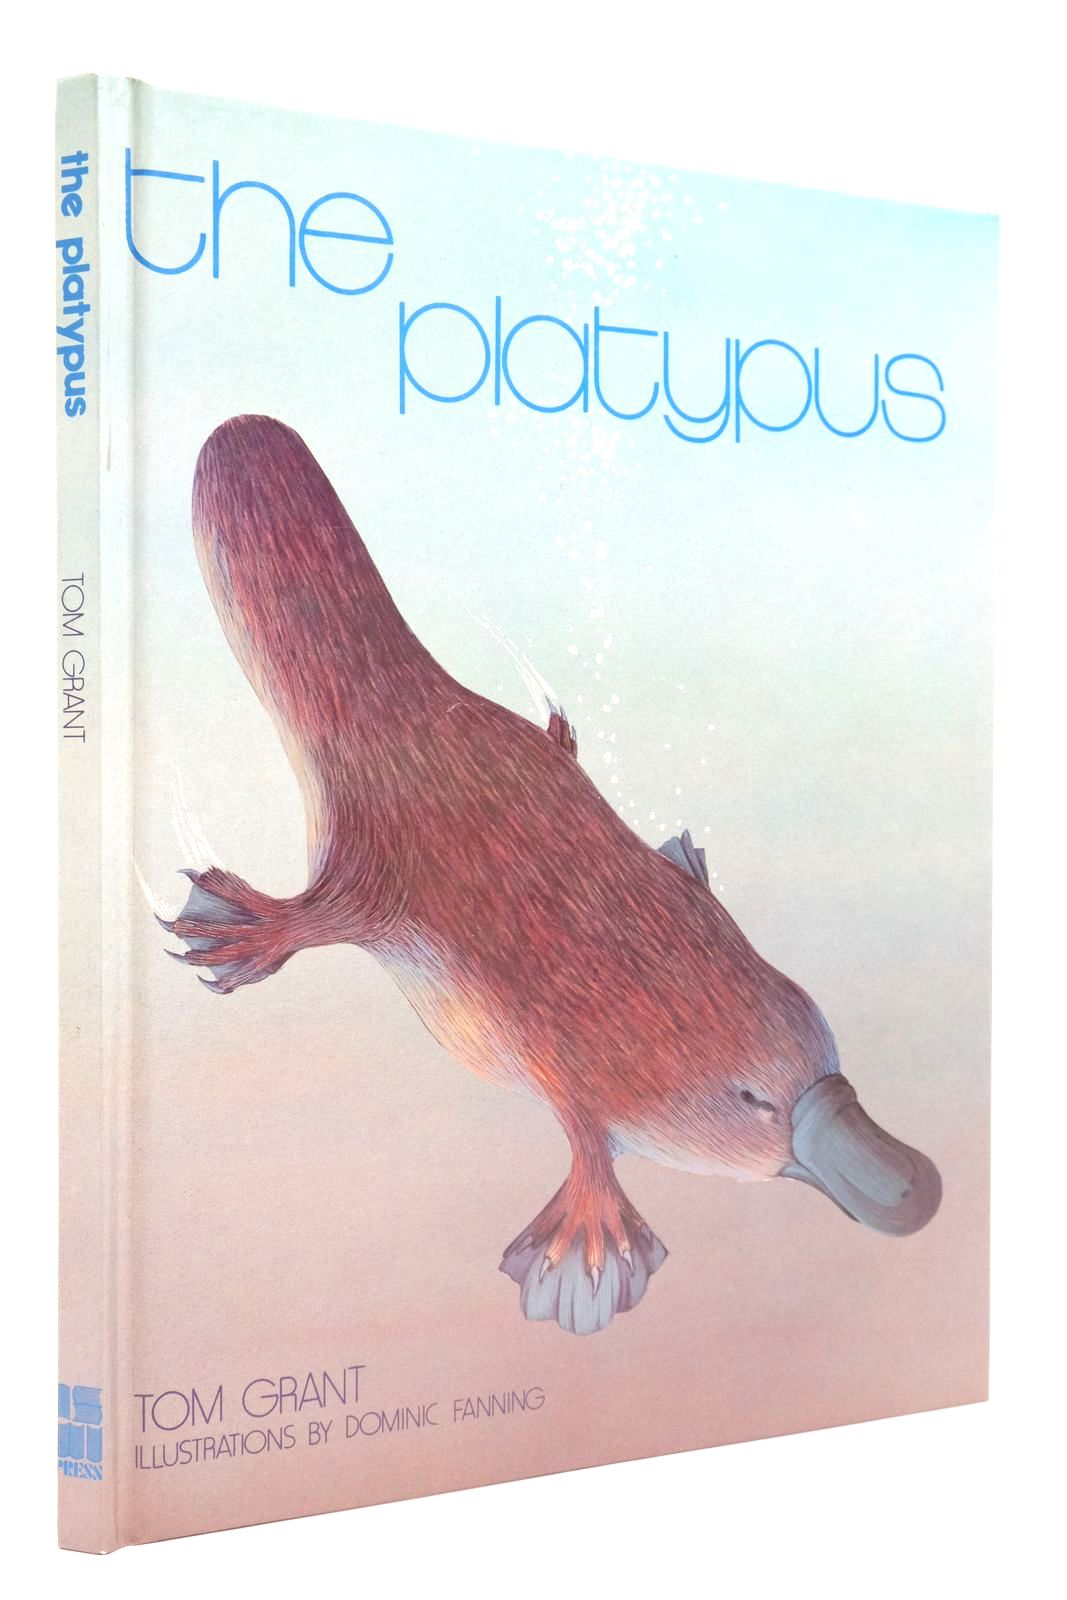 Photo of THE PLATYPUS written by Grant, Tom illustrated by Fanning, Dominic published by New South Wales University Press (STOCK CODE: 2138645)  for sale by Stella & Rose's Books